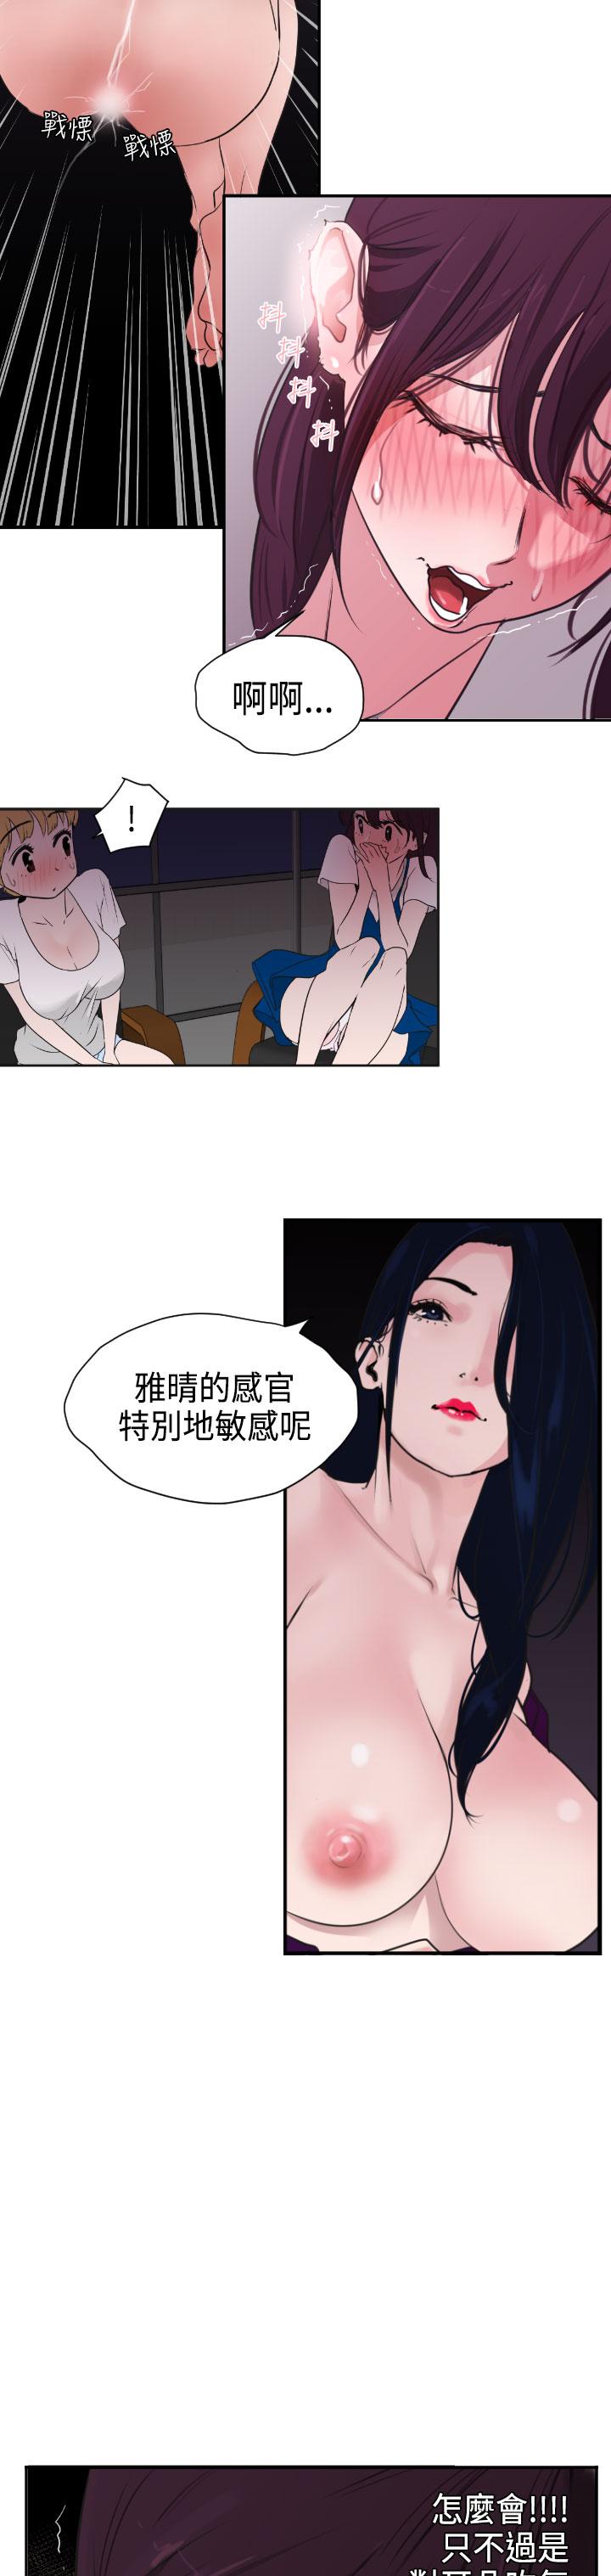 Desire King (慾求王) Ch.1-12 (chinese) 99